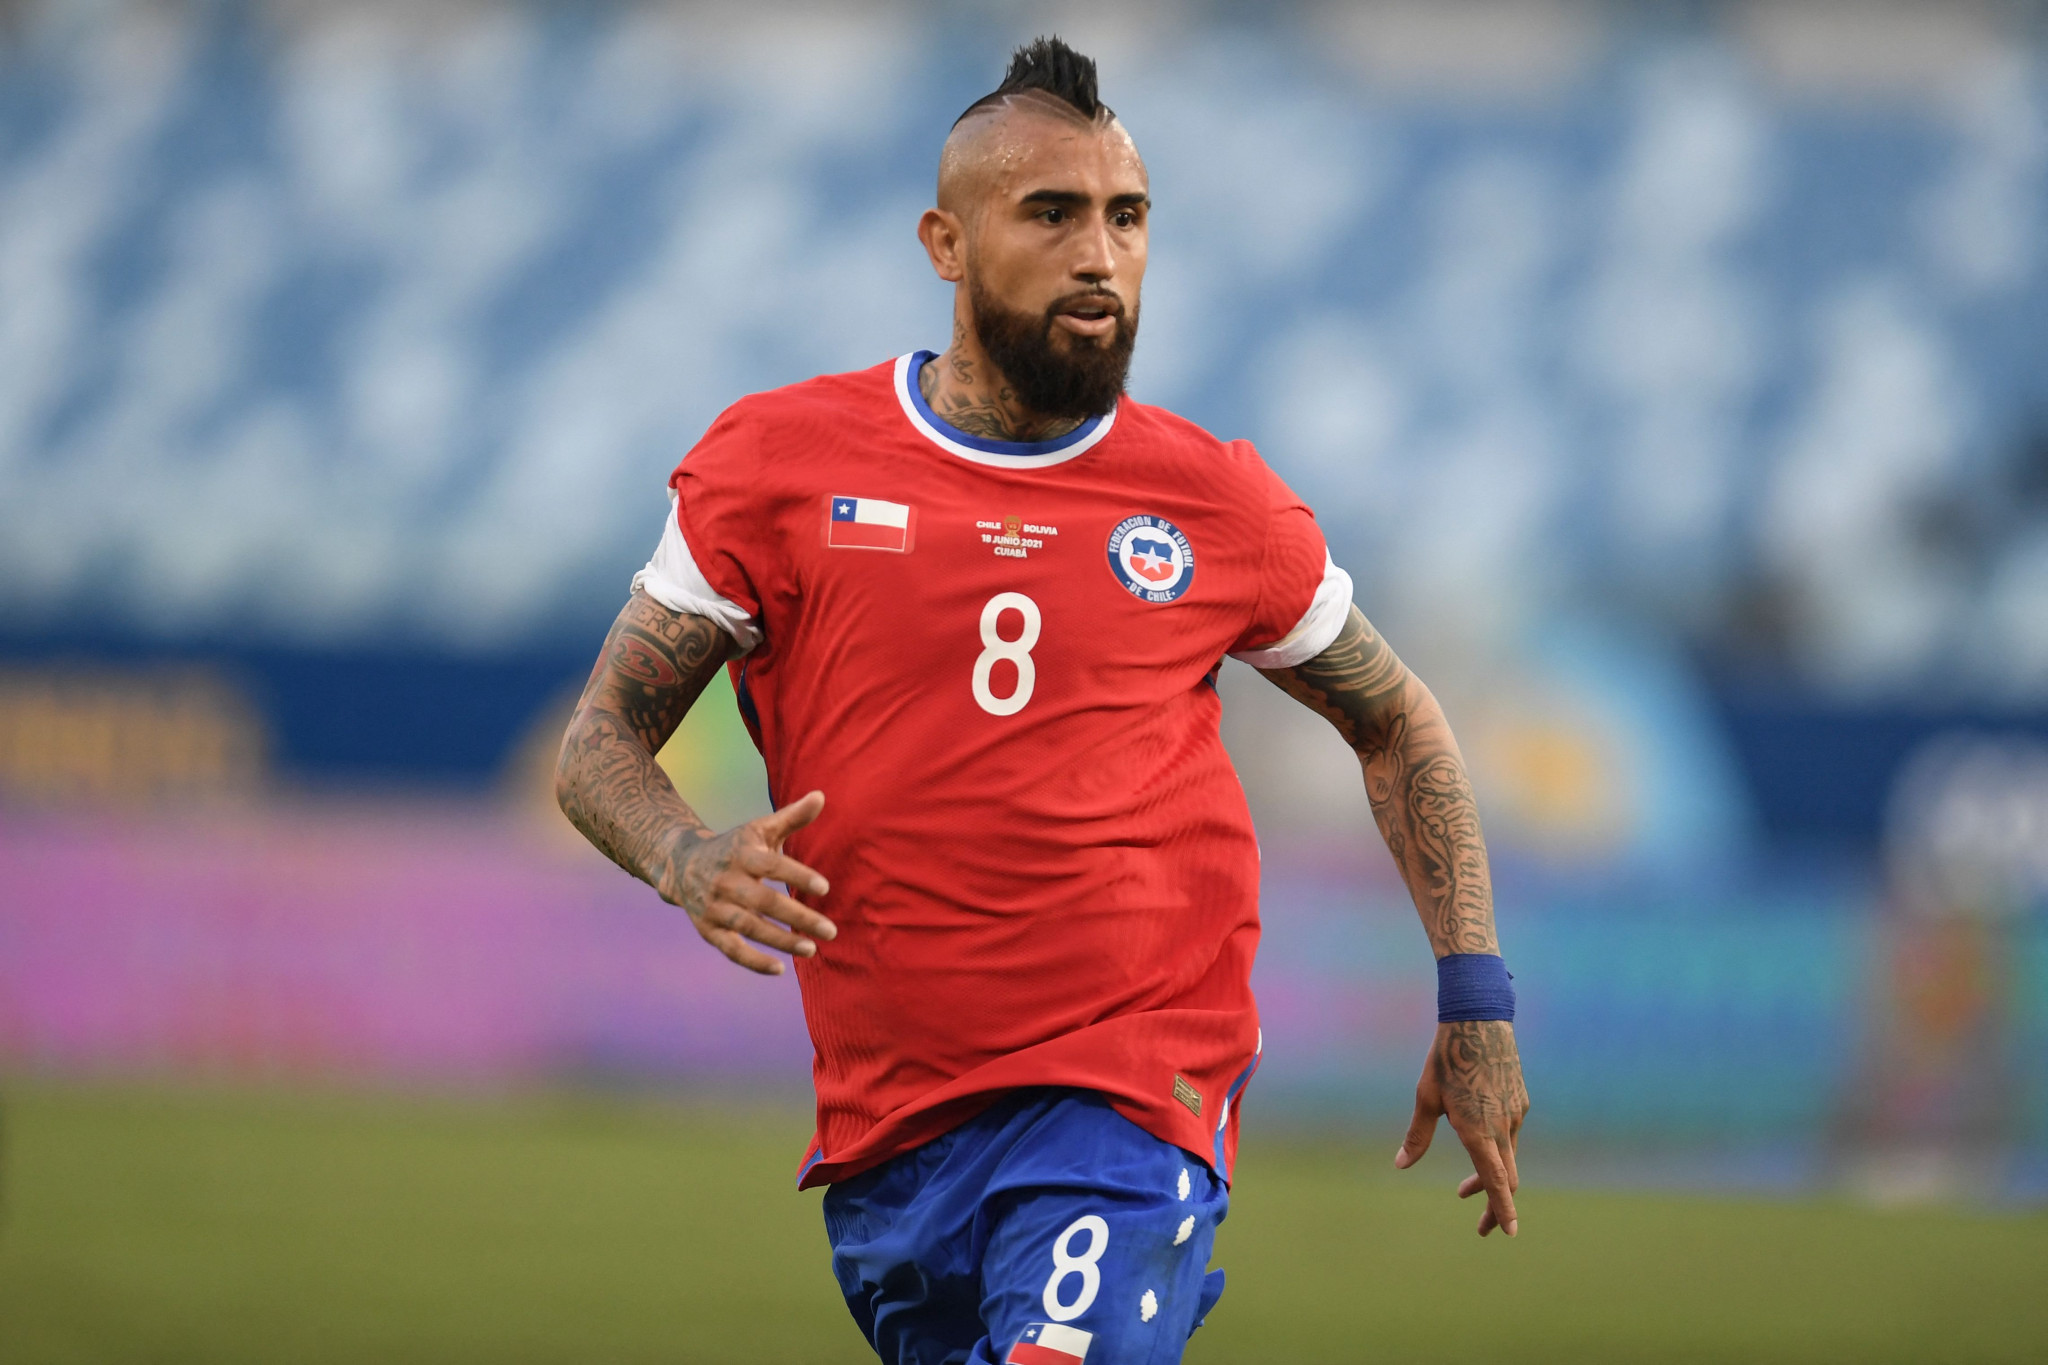 Arturo Vidal was reportedly one of the players shown on social media receiving a haircut ©Getty Images